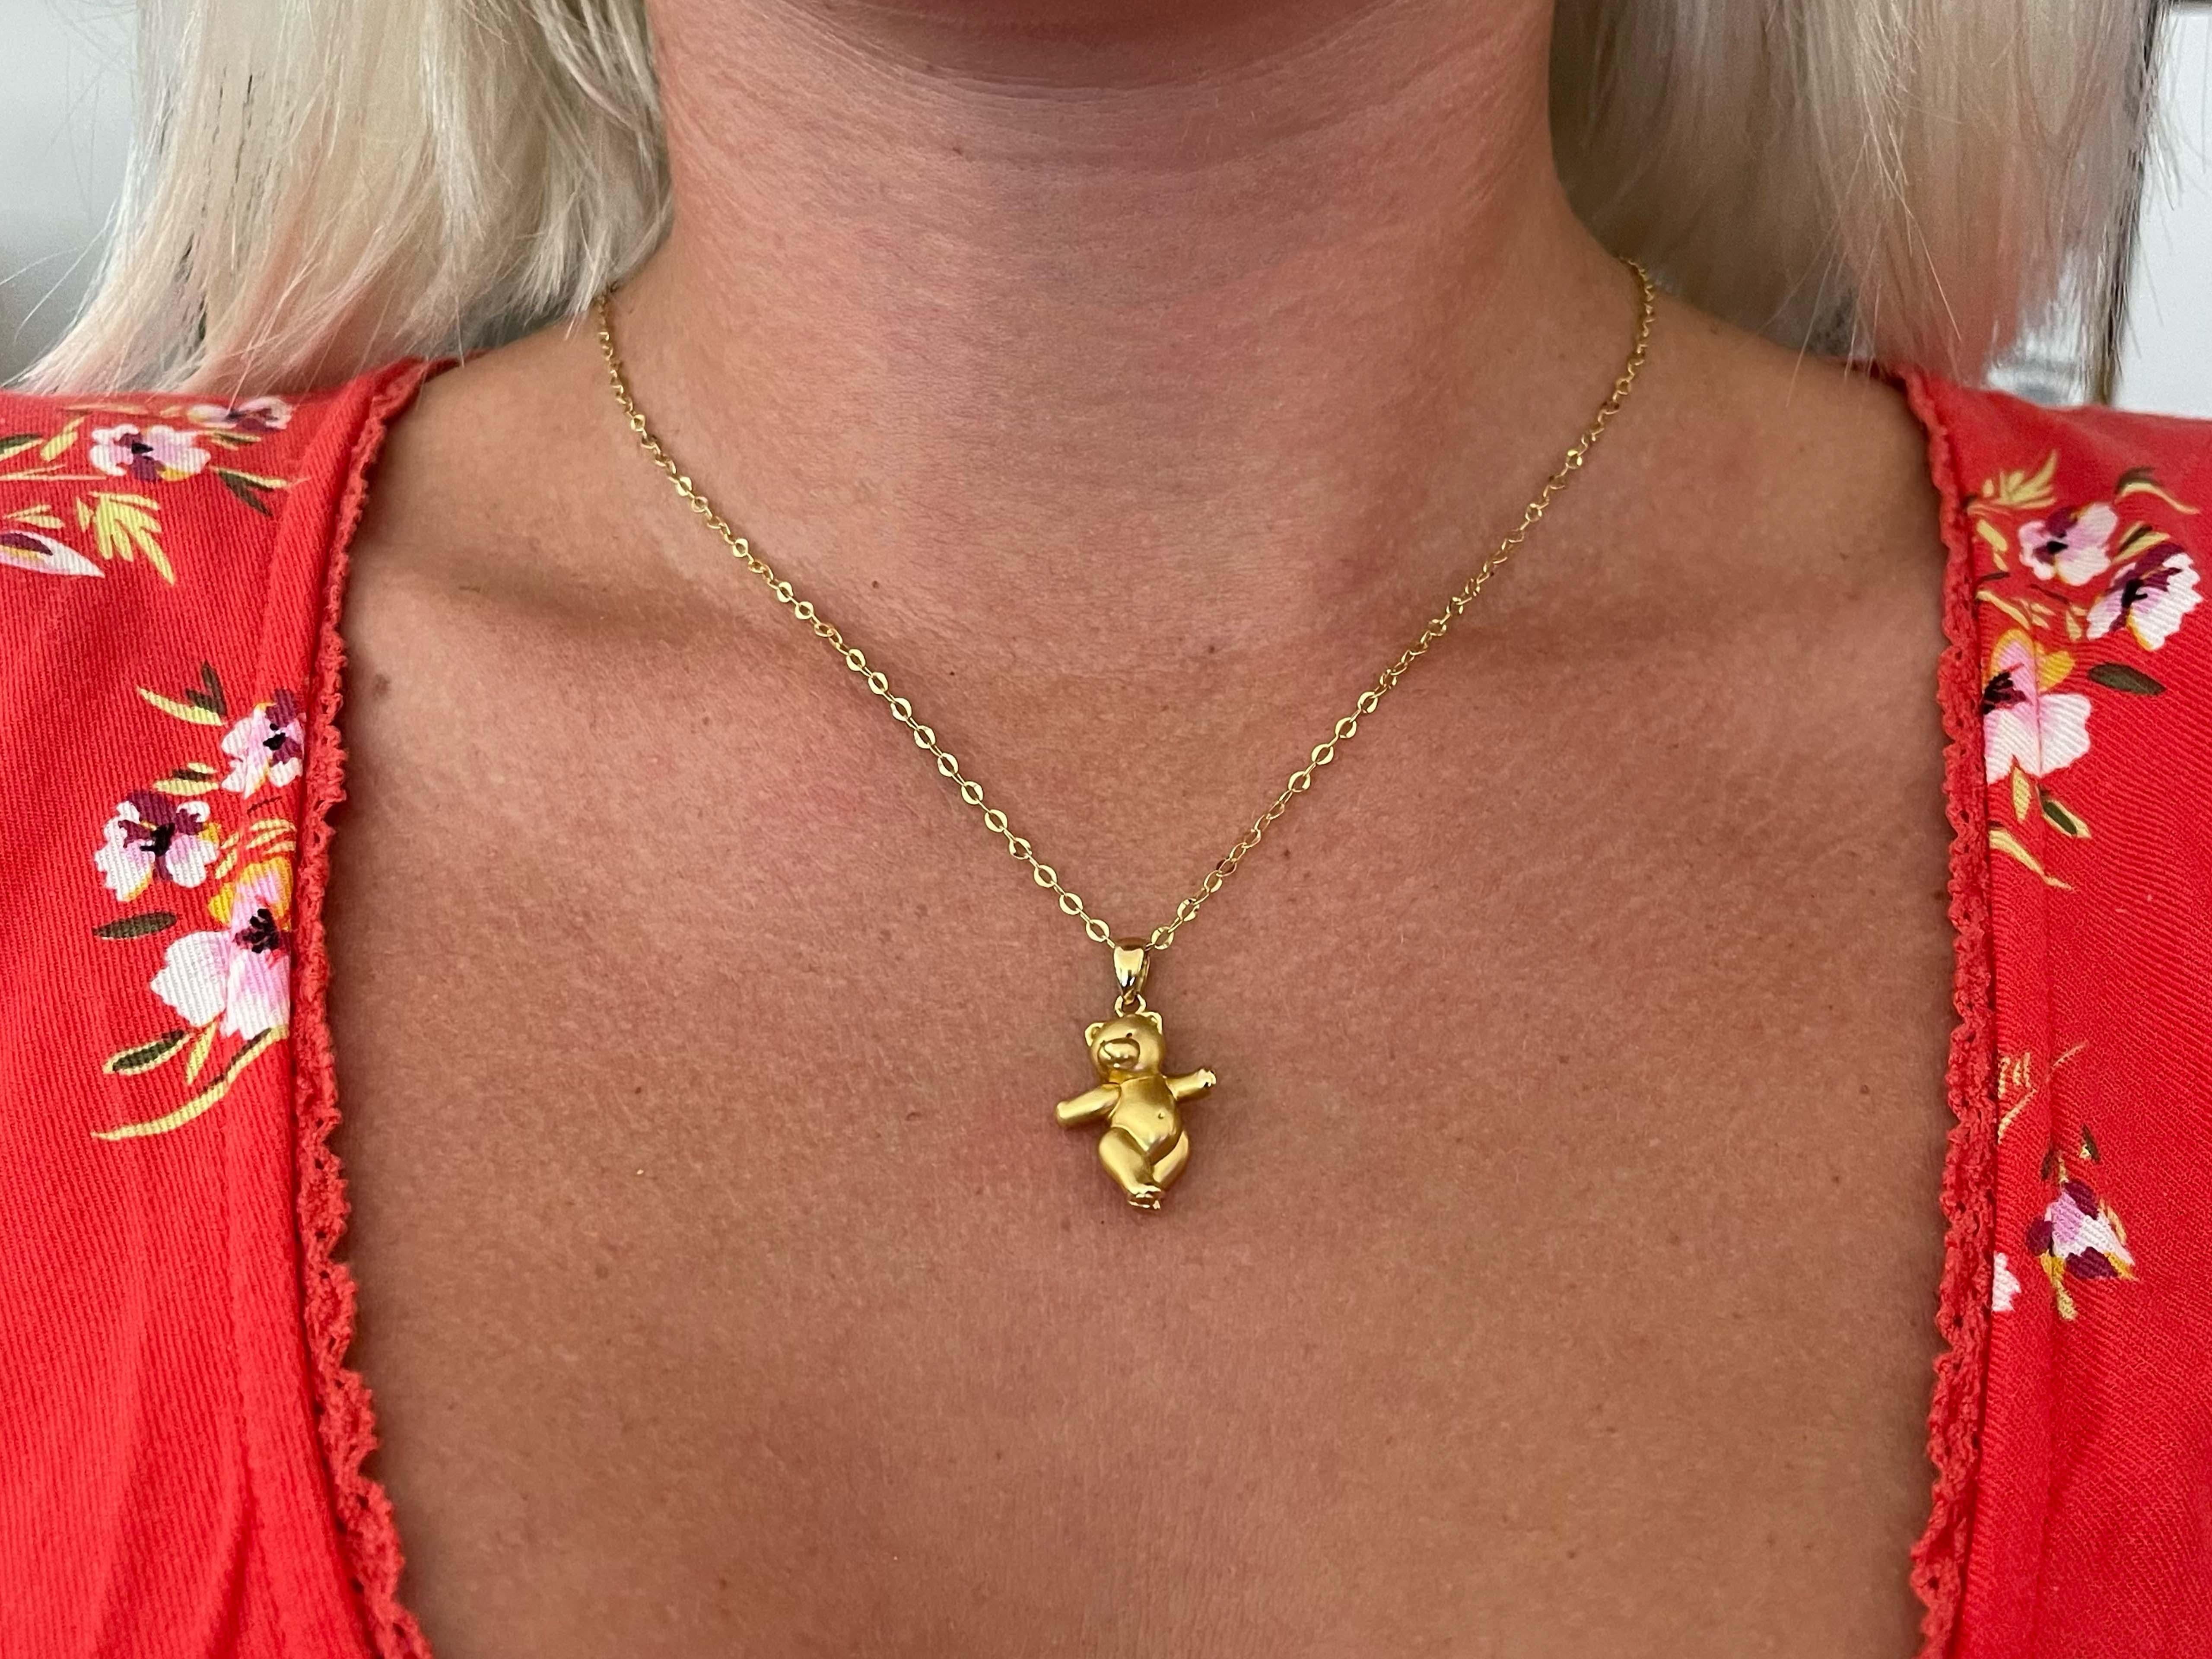 This pendant and chain is richly crafted in 18k yellow gold. The pendant measures 20 mm x 16 mm and comes on a 18 inch fancy link chain with a spring ring. The chain and pendant are stamped 